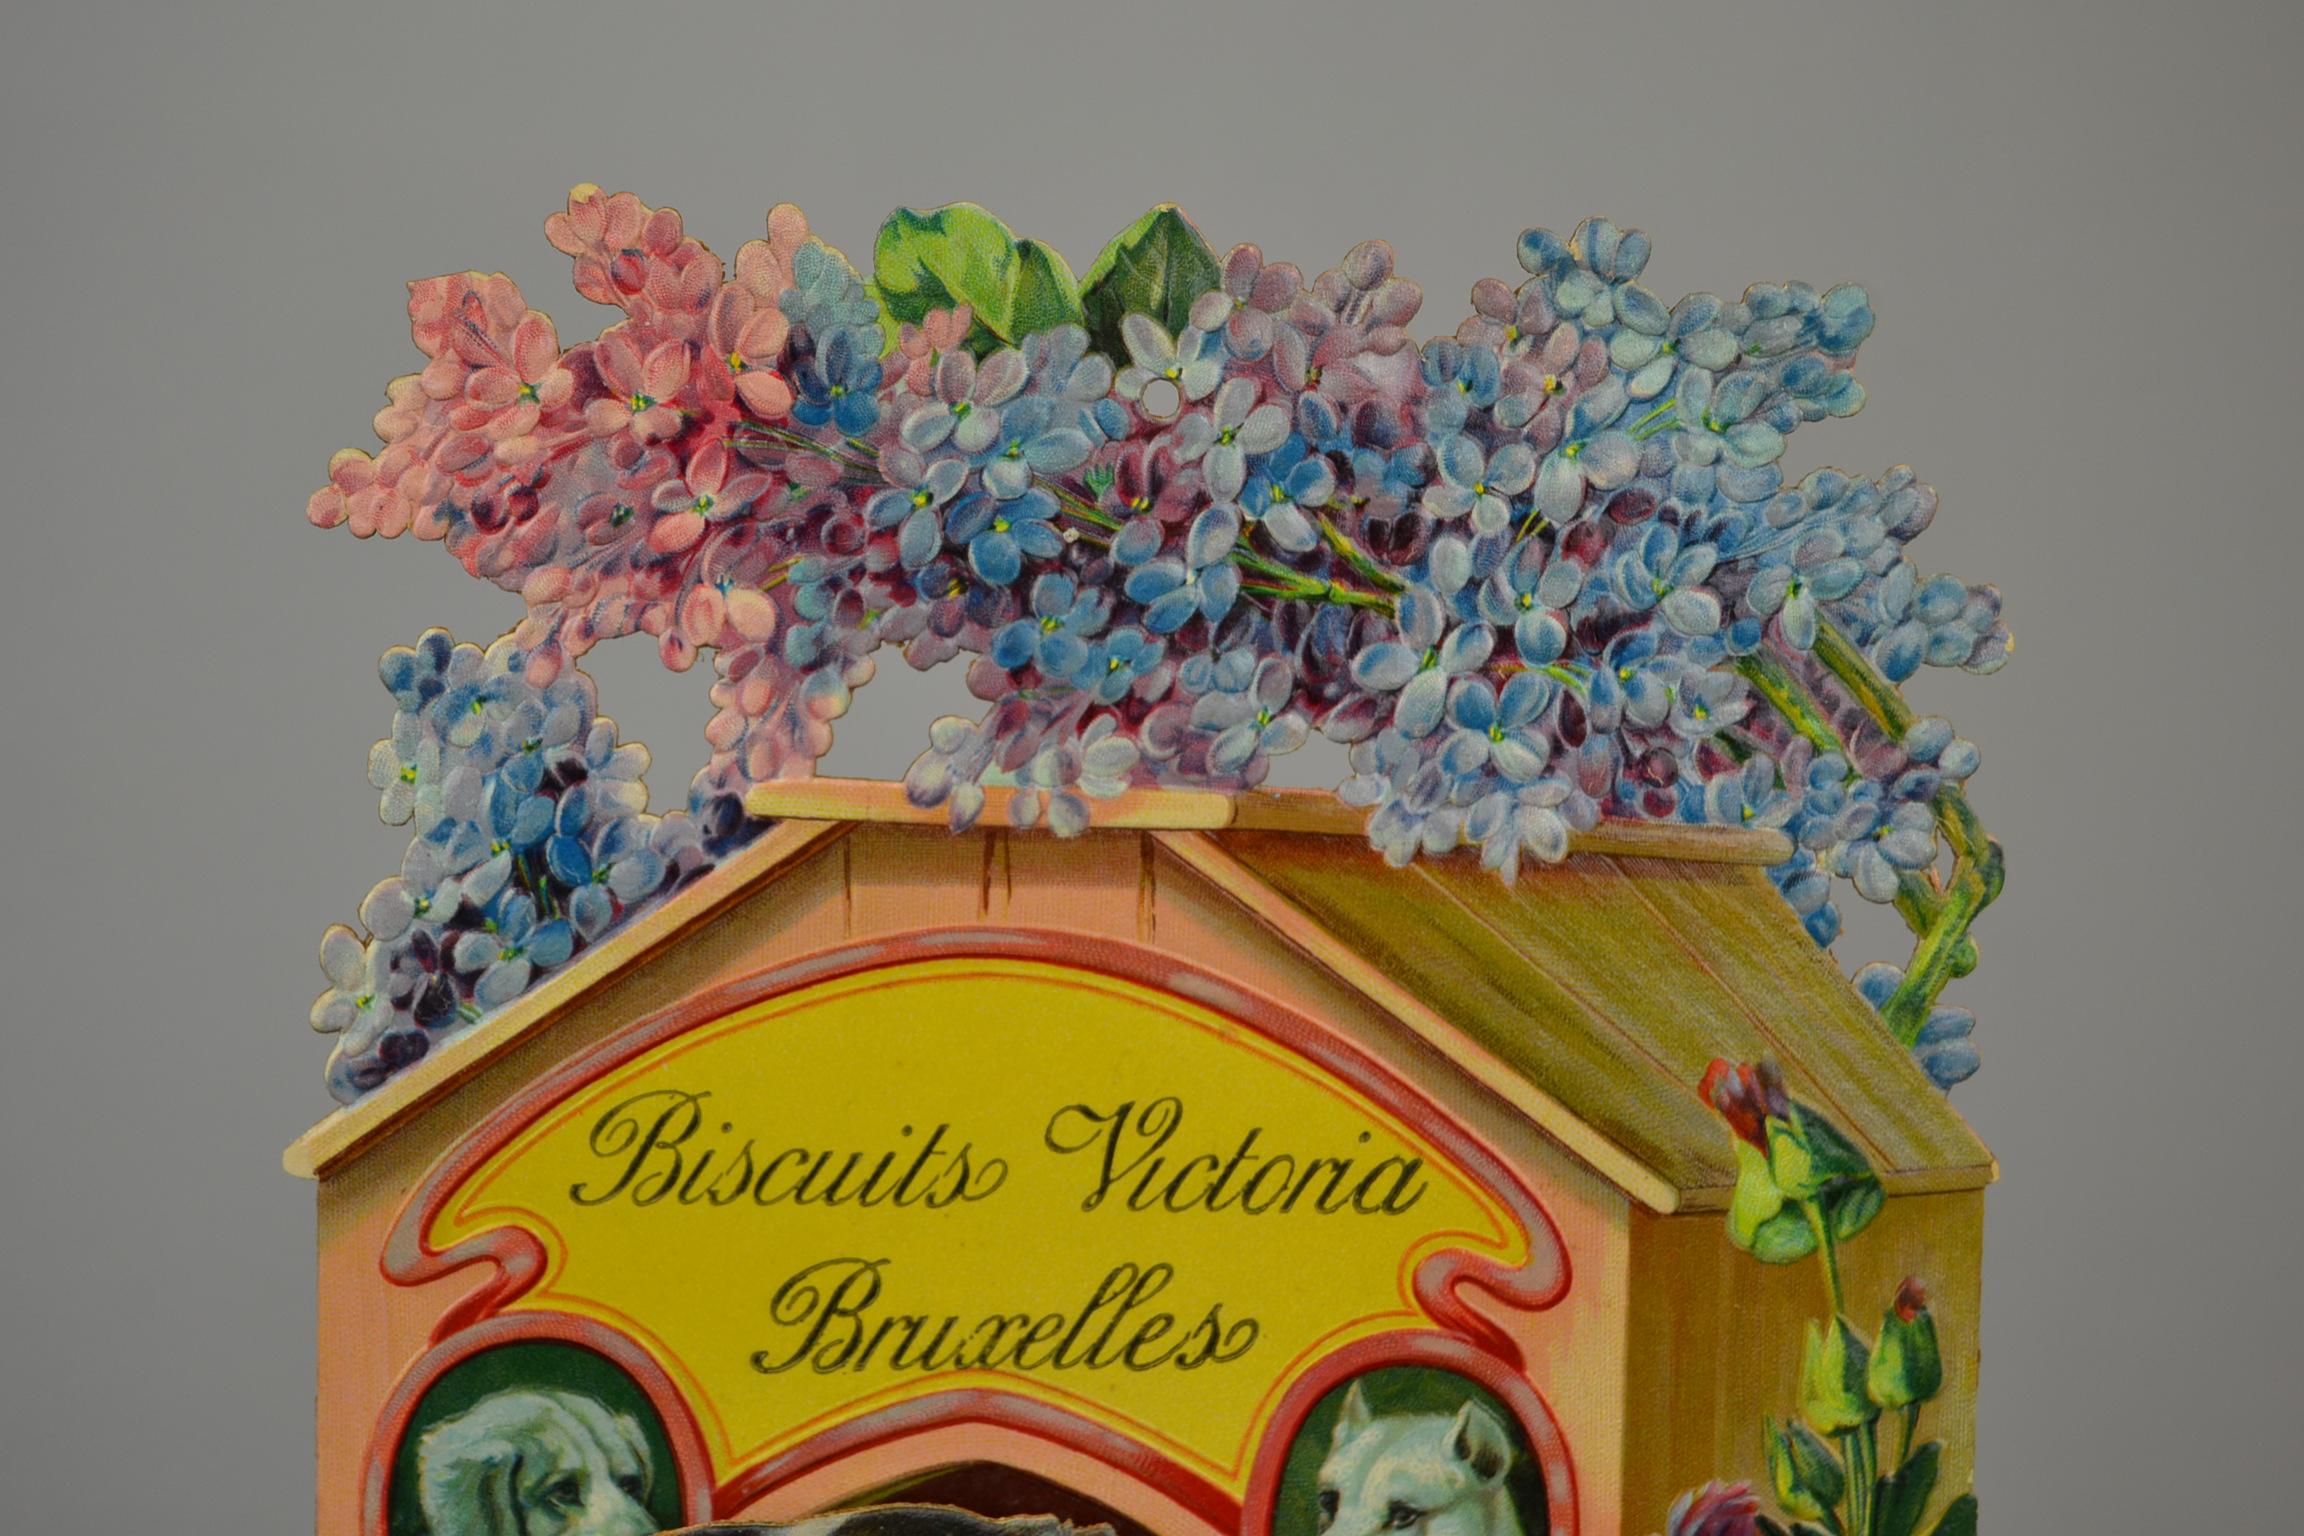 Antique Cardboard Publicity Sign - 3D Store Display in Relief Cardboard 
for Biscuits Victoria Brussels. This Sign dates 1920s and has the Suchard Biscuit and Chocolate Dog ! 

This Victoria Biscuit Wall Decoration Sign has elegant use of Pastel